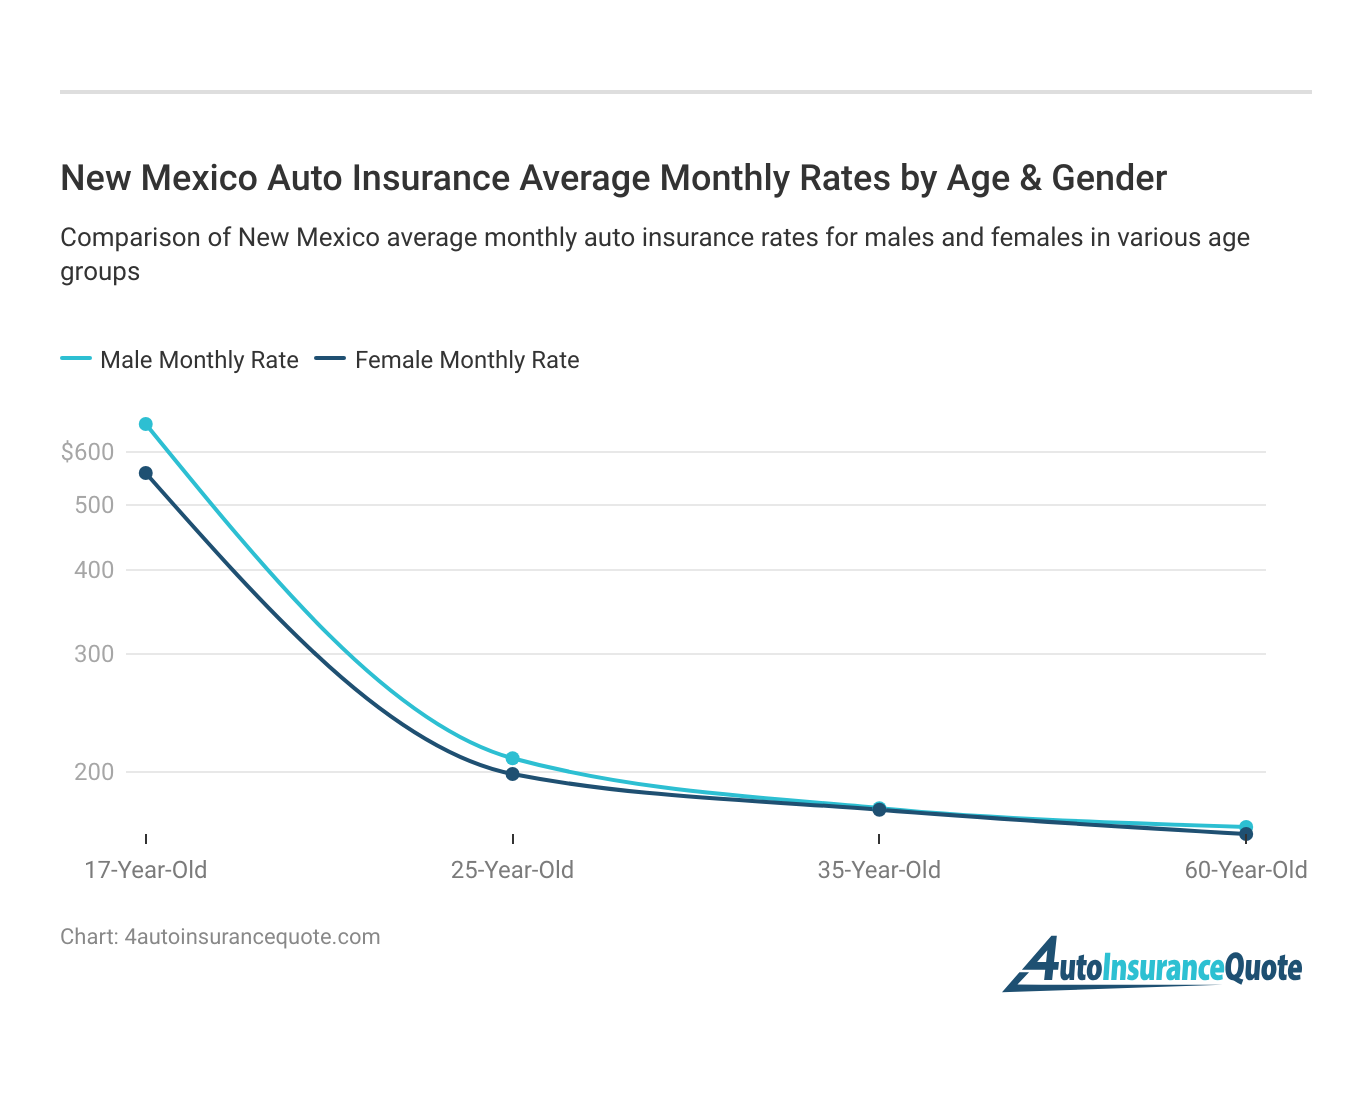 <h3>New Mexico Auto Insurance Average Monthly Rates by Age & Gender</h3>